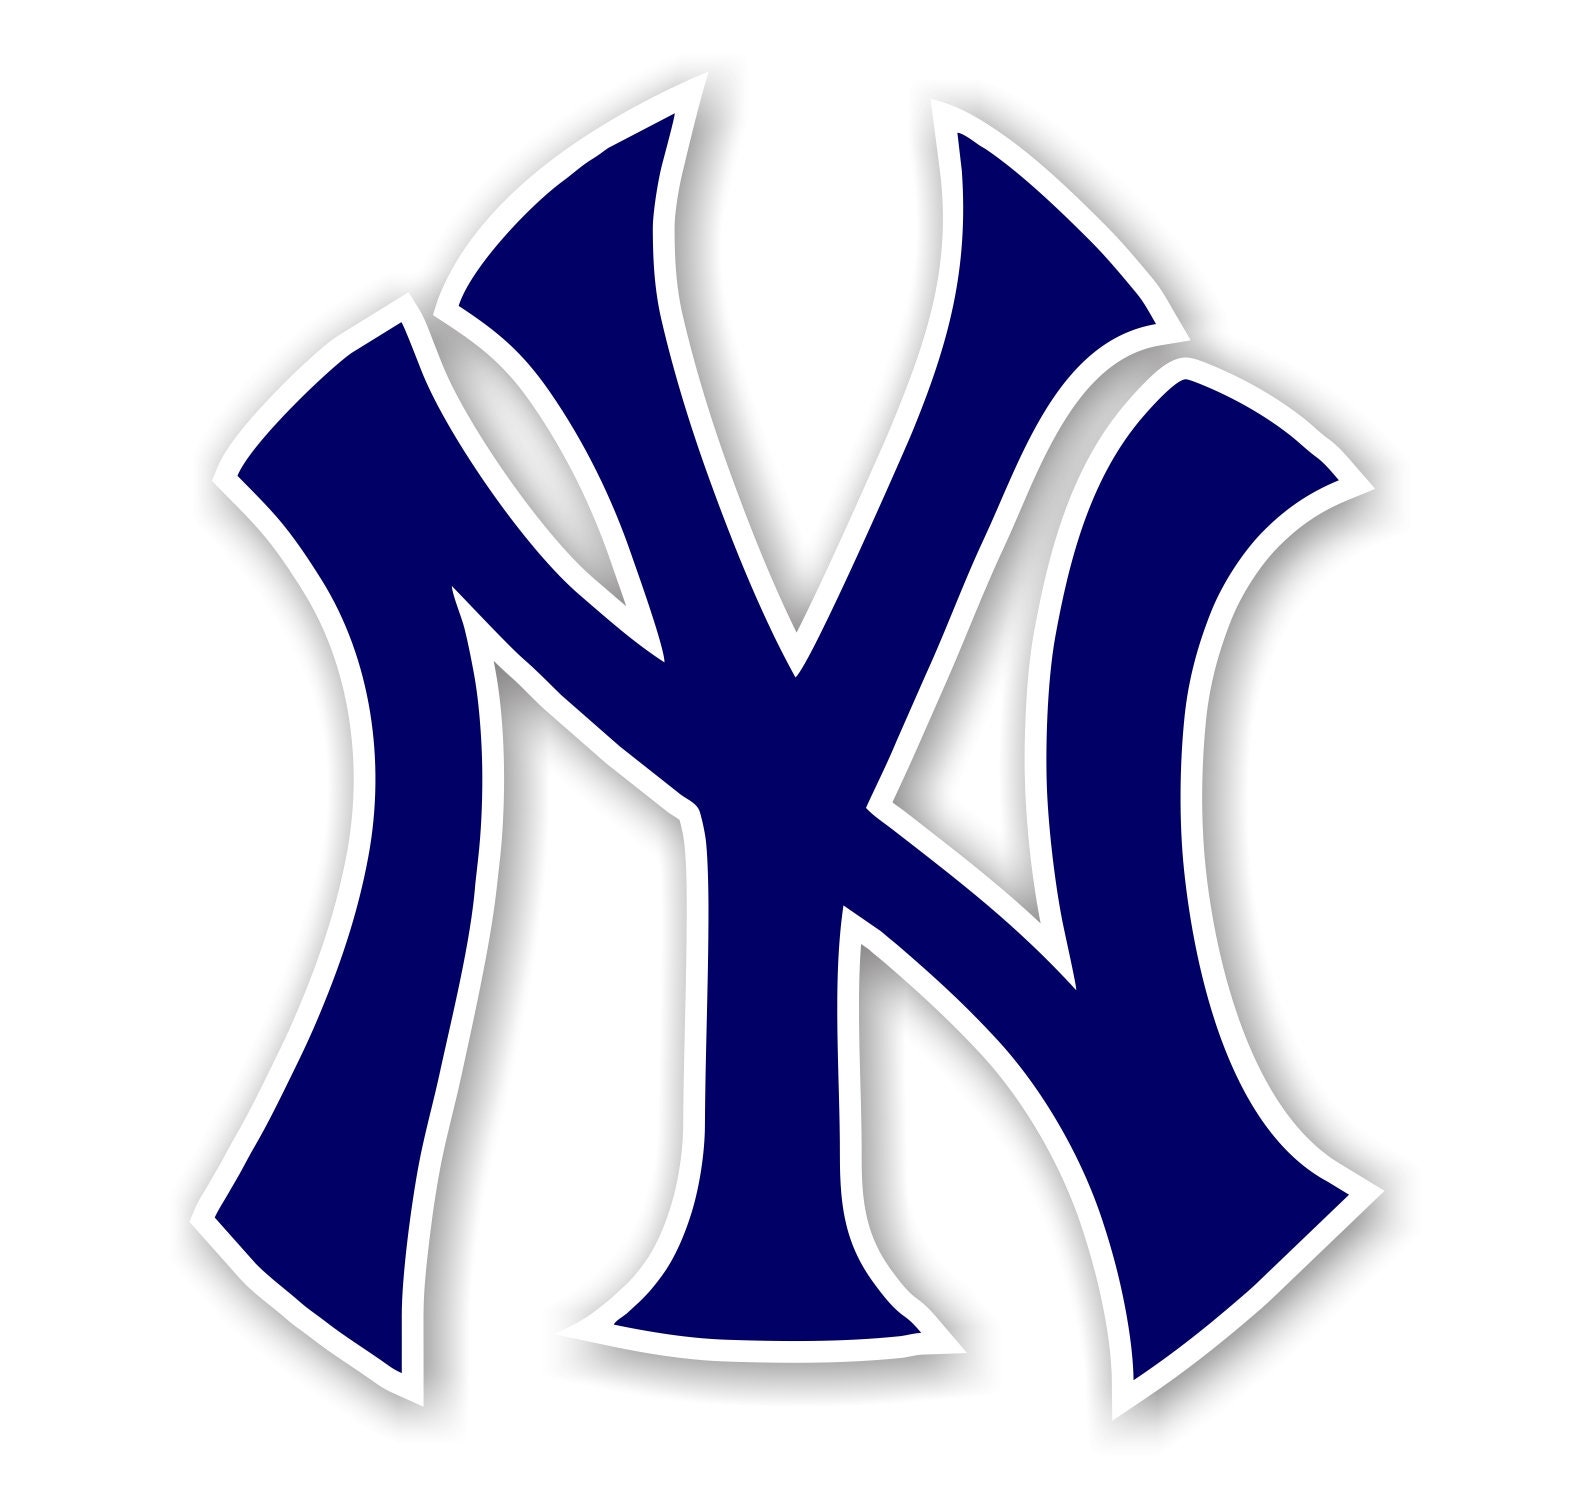 New York Yankees "NY" Precision Cut Decal.